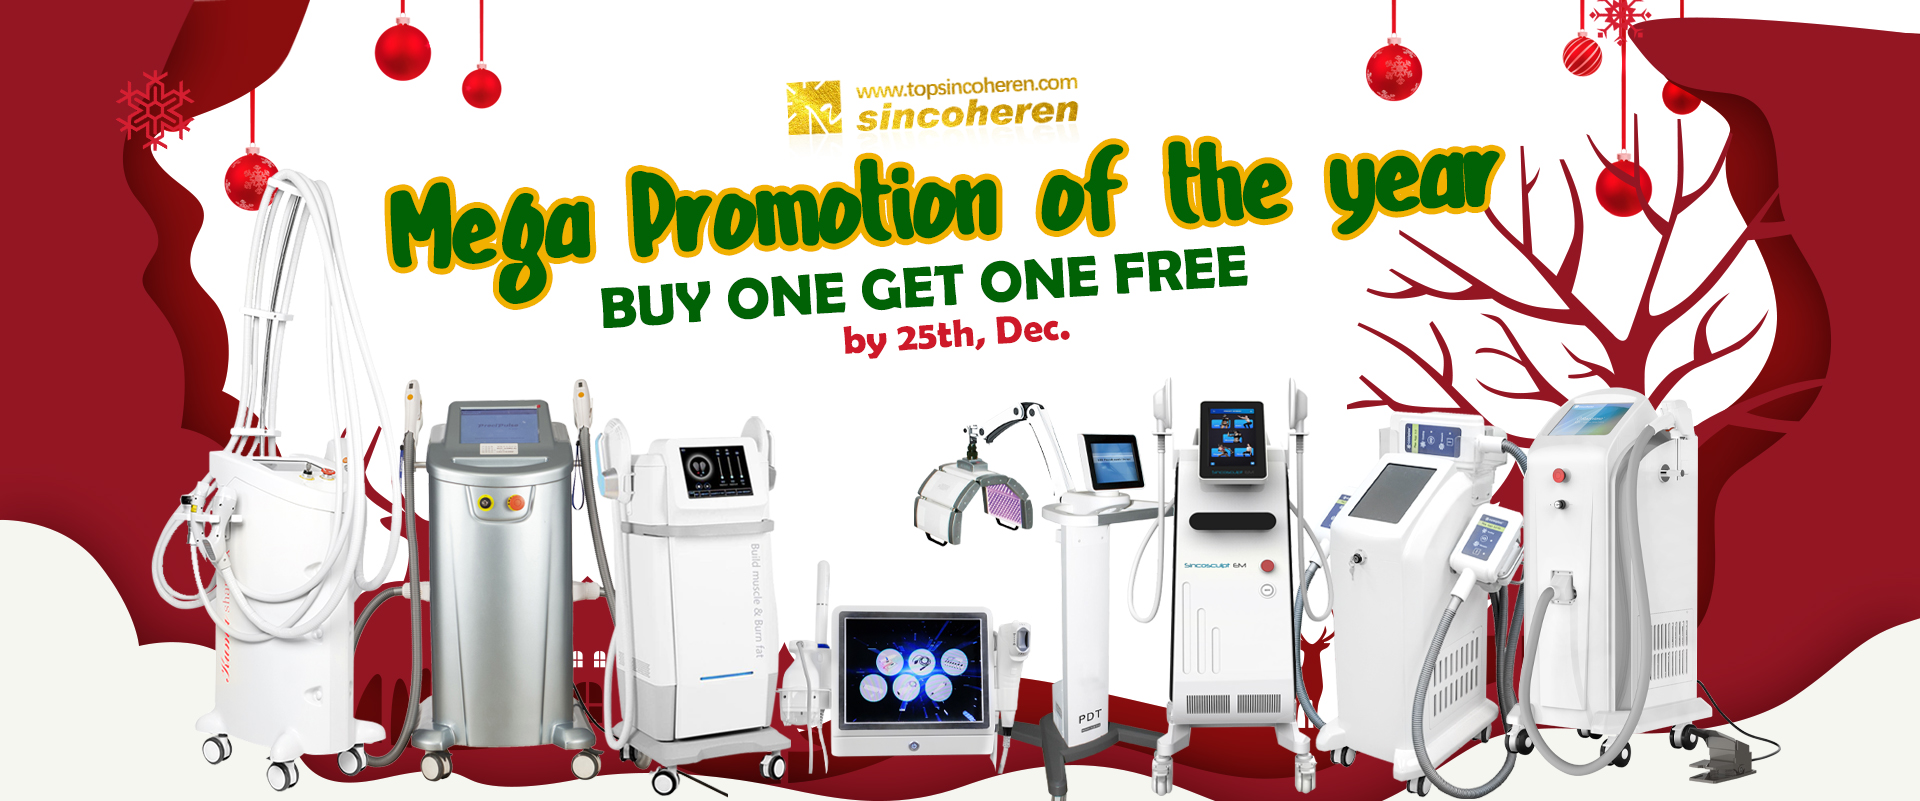 Topsincoheren Christmas promotion of the year - Buy one get one free